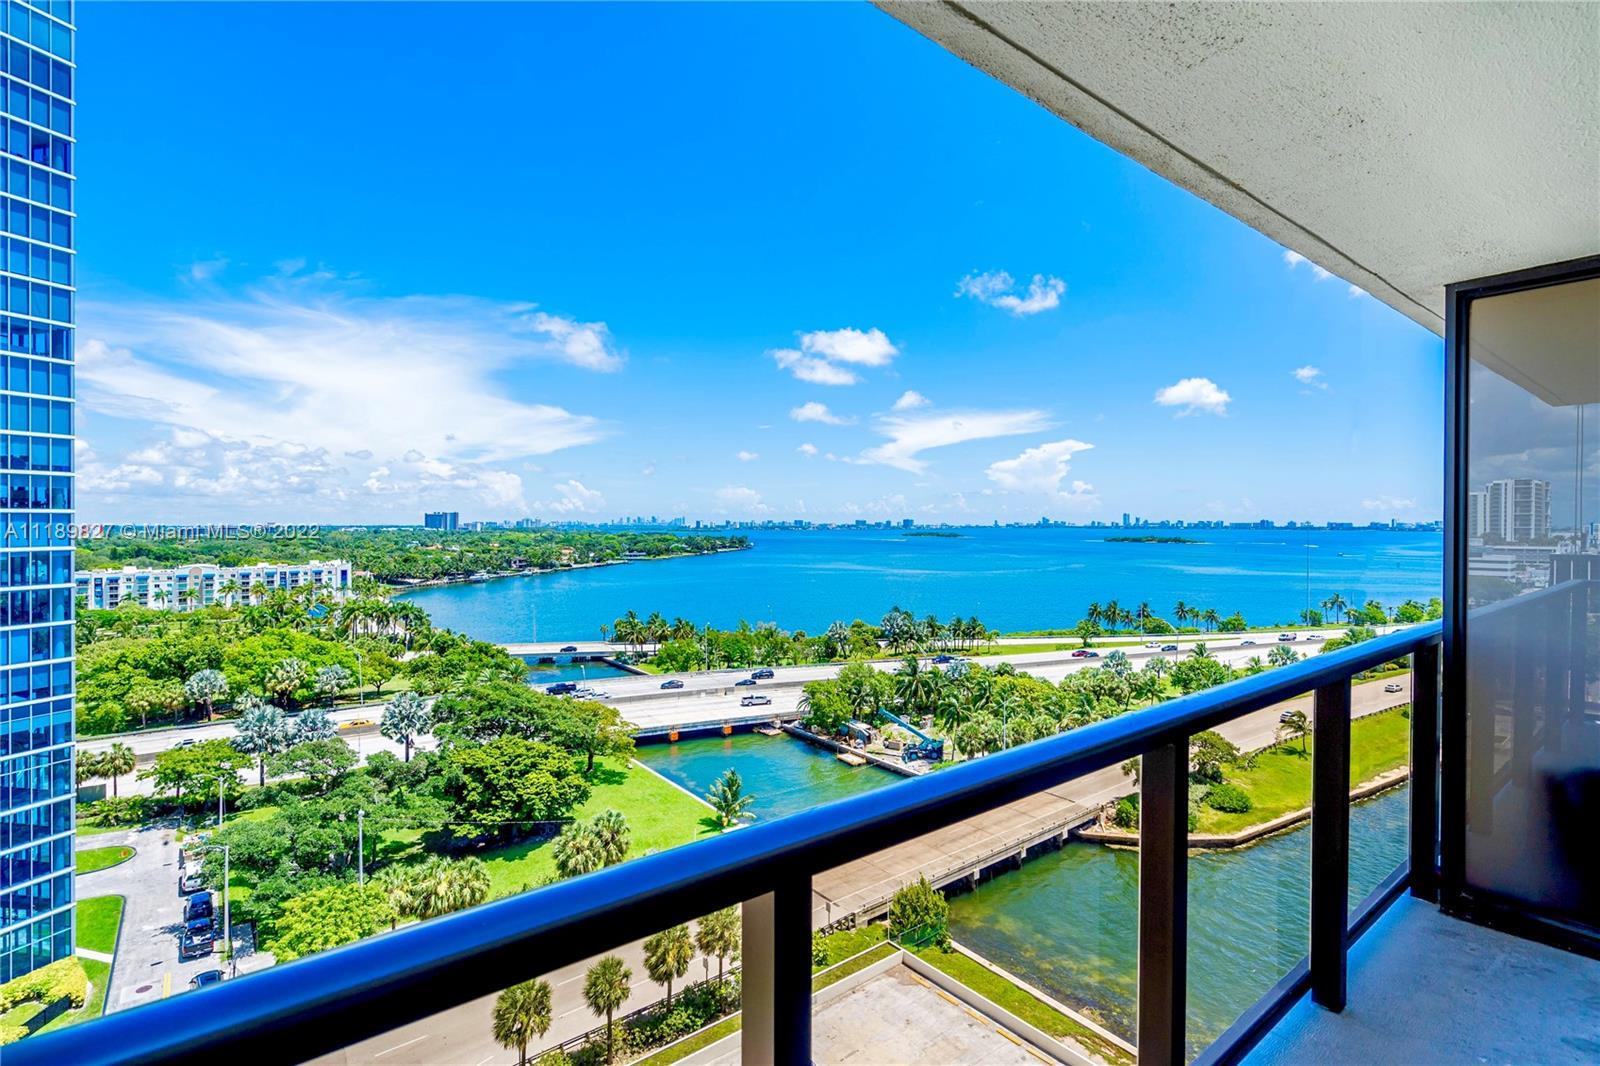 BEST LOCATION in Midtown Miami - Edgewater area! "T level" directly below the PH floor. Wake up to a